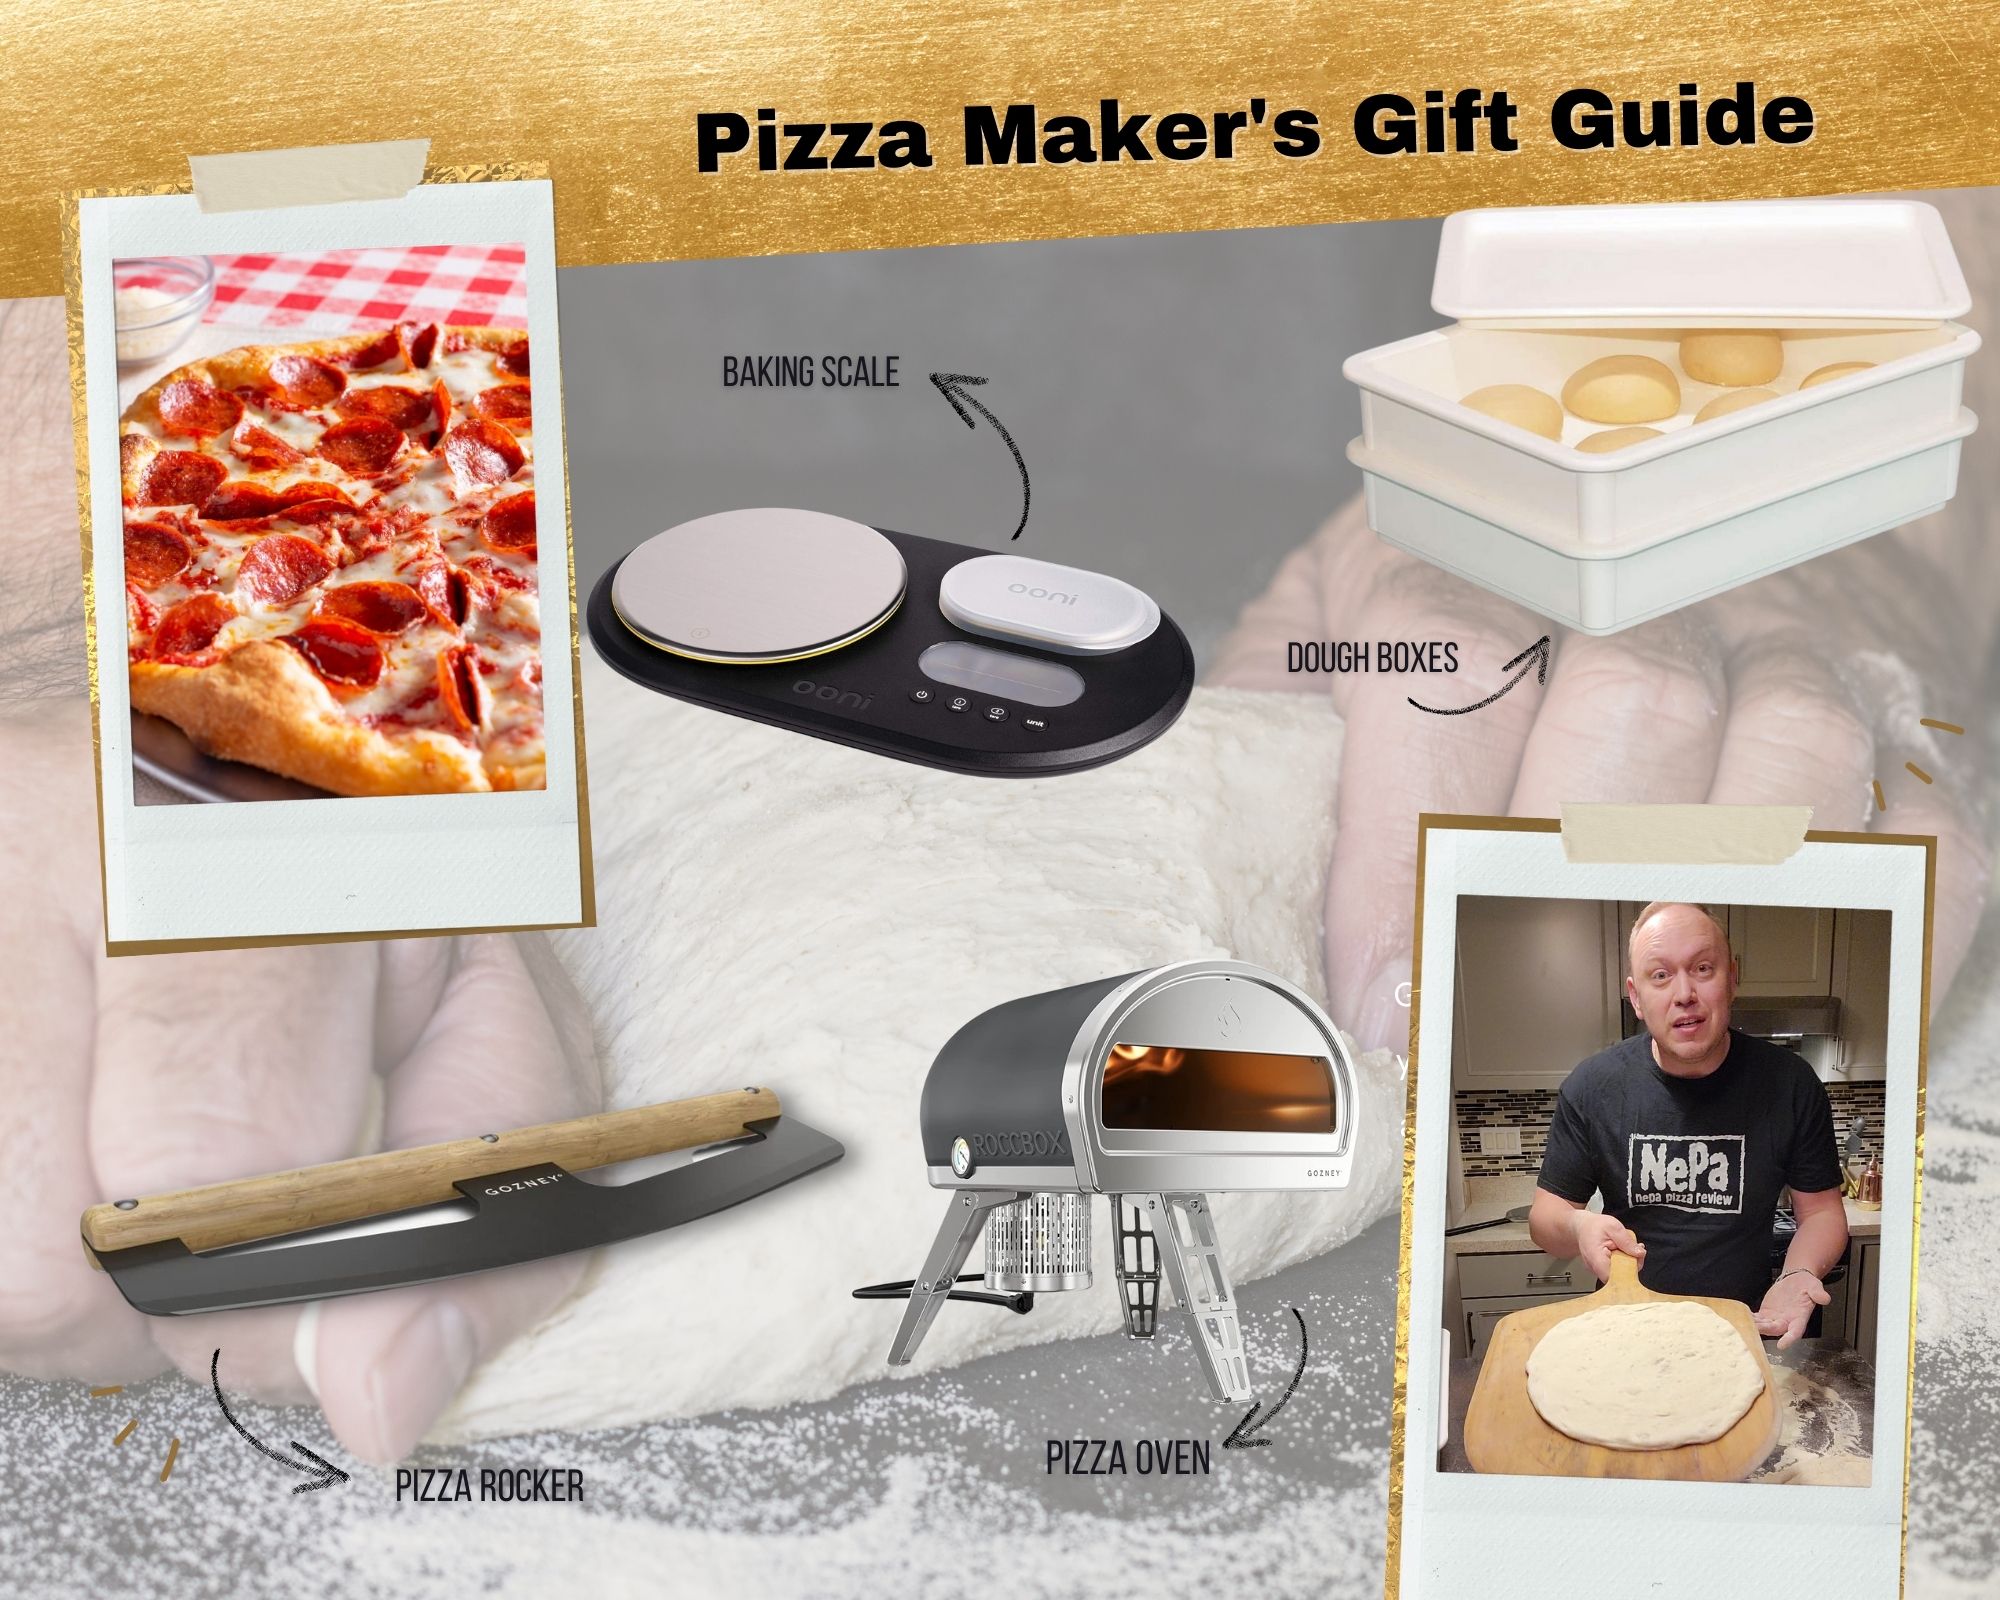 Rocco's is Providing Do it Yourself Pizza Kits for Home